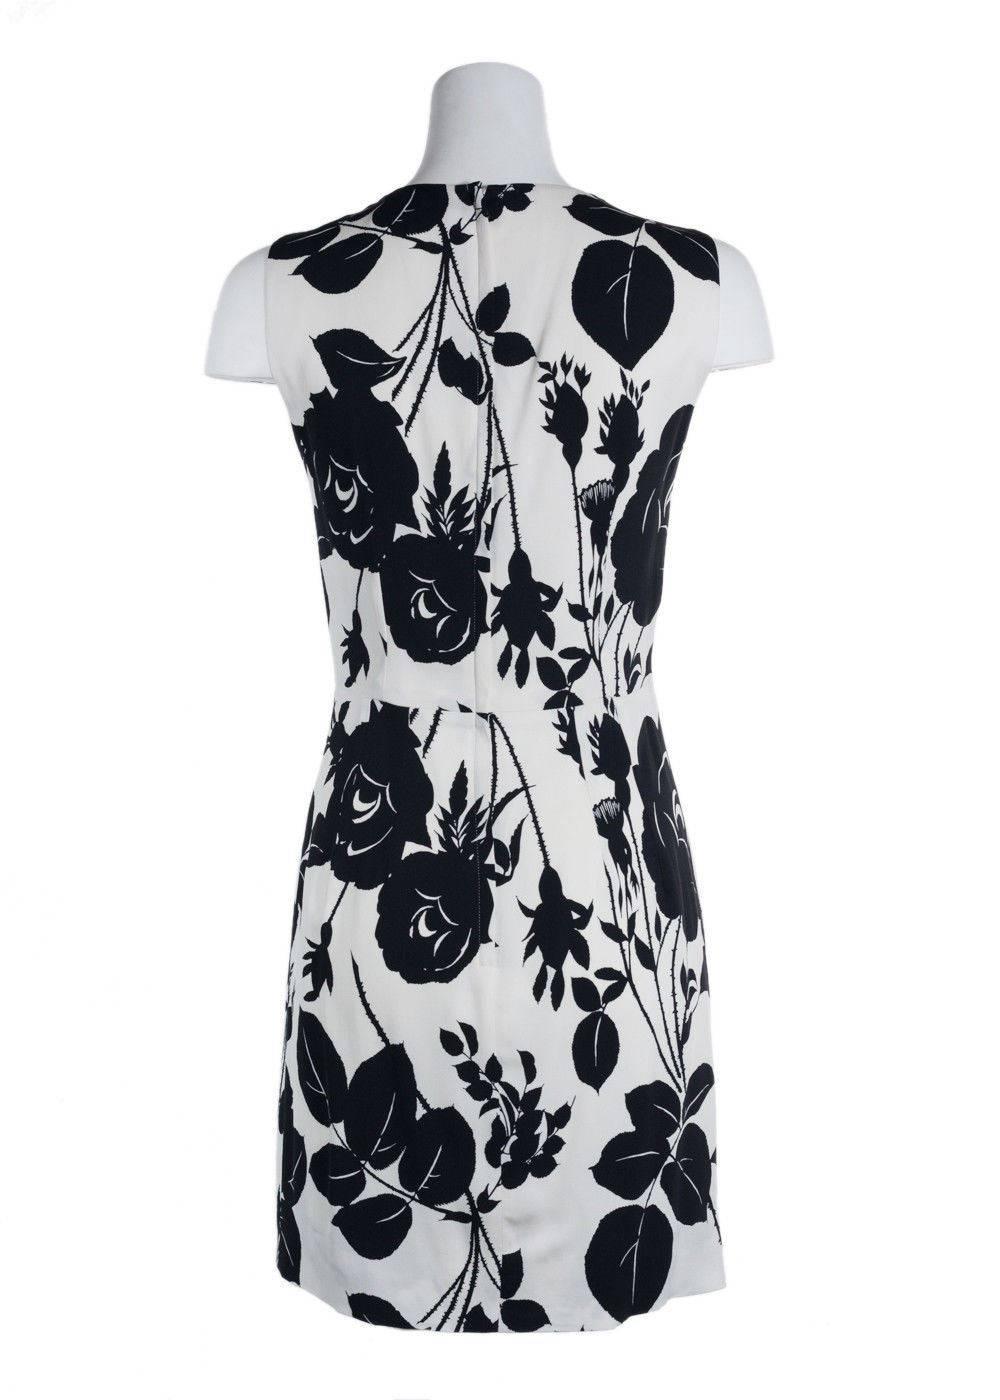 Brand New Dolce & Gabbana Women's Dress
Original Tags & Hanger Included
Retails in Stores & Online for $2895
Size IT36 / US0 Fits True to Size

Dolce & Gabbana's viscose blend floral sleeveless dress. This sleeveless designer dress features black